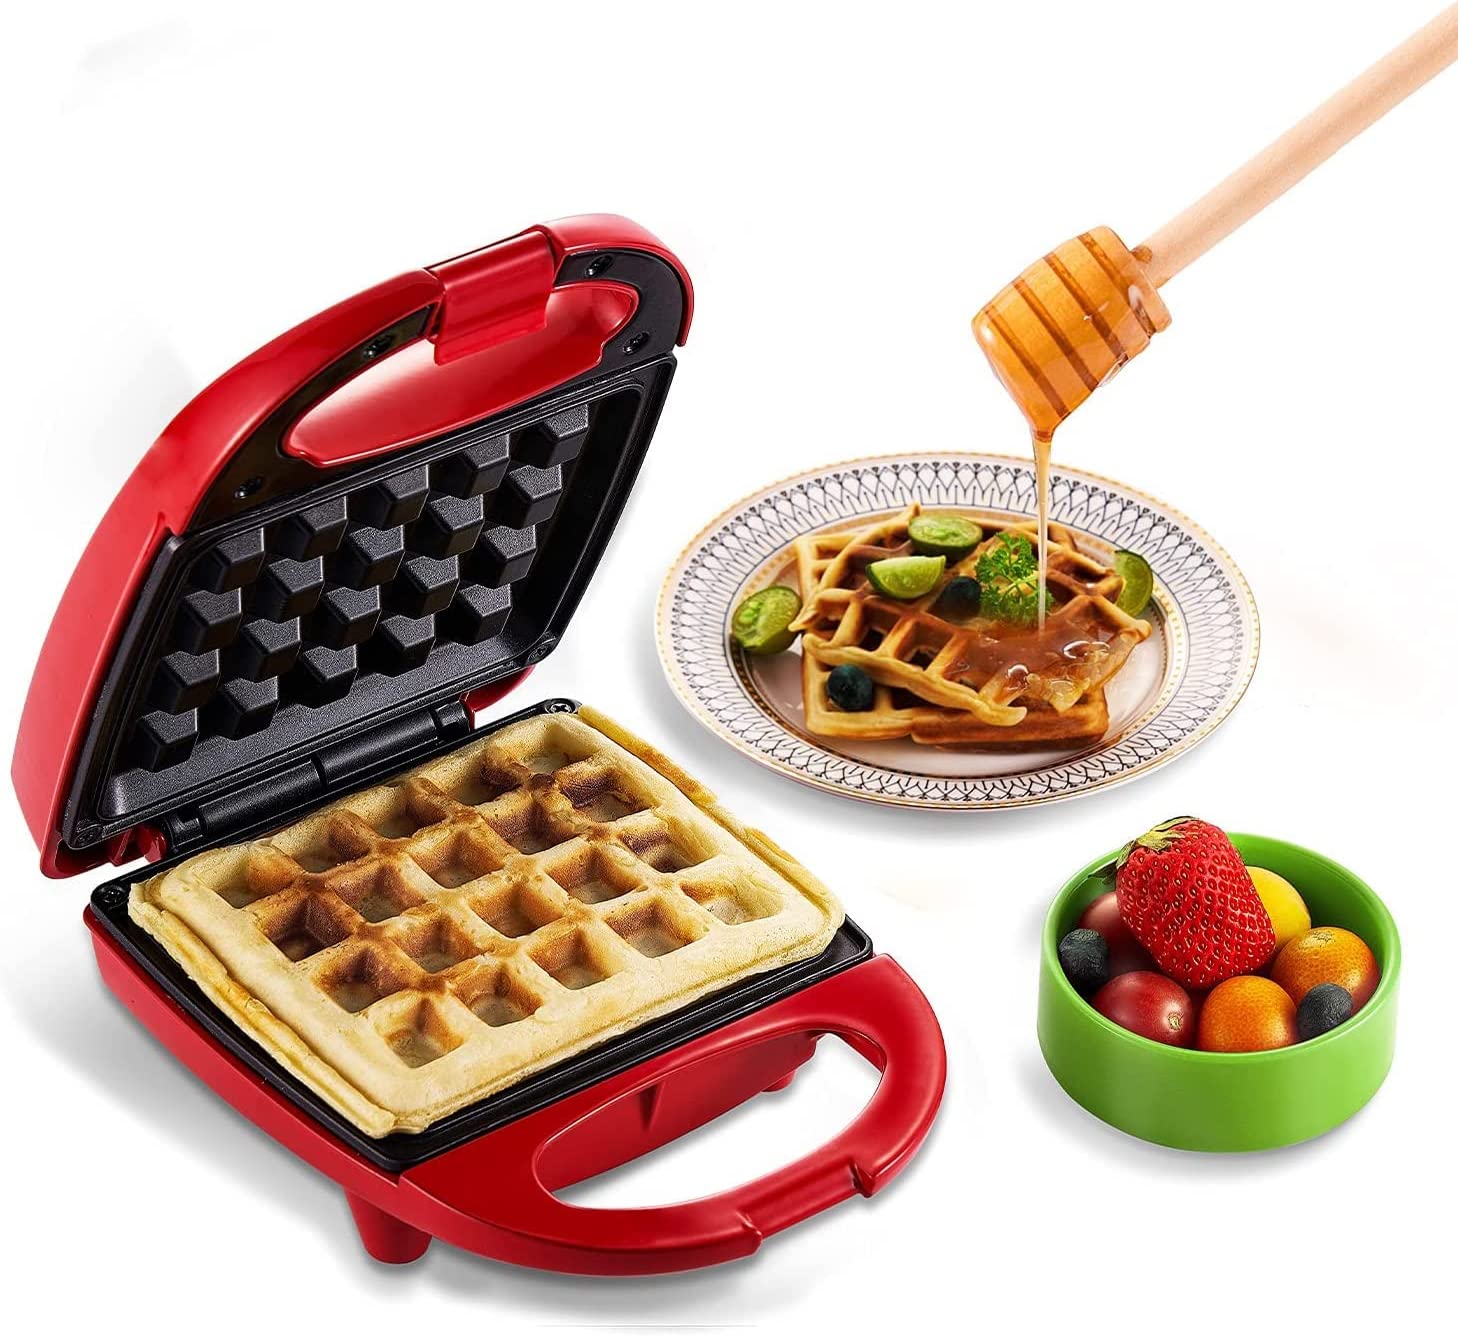 Dash Mini Waffle Maker Review - TwoSleevers